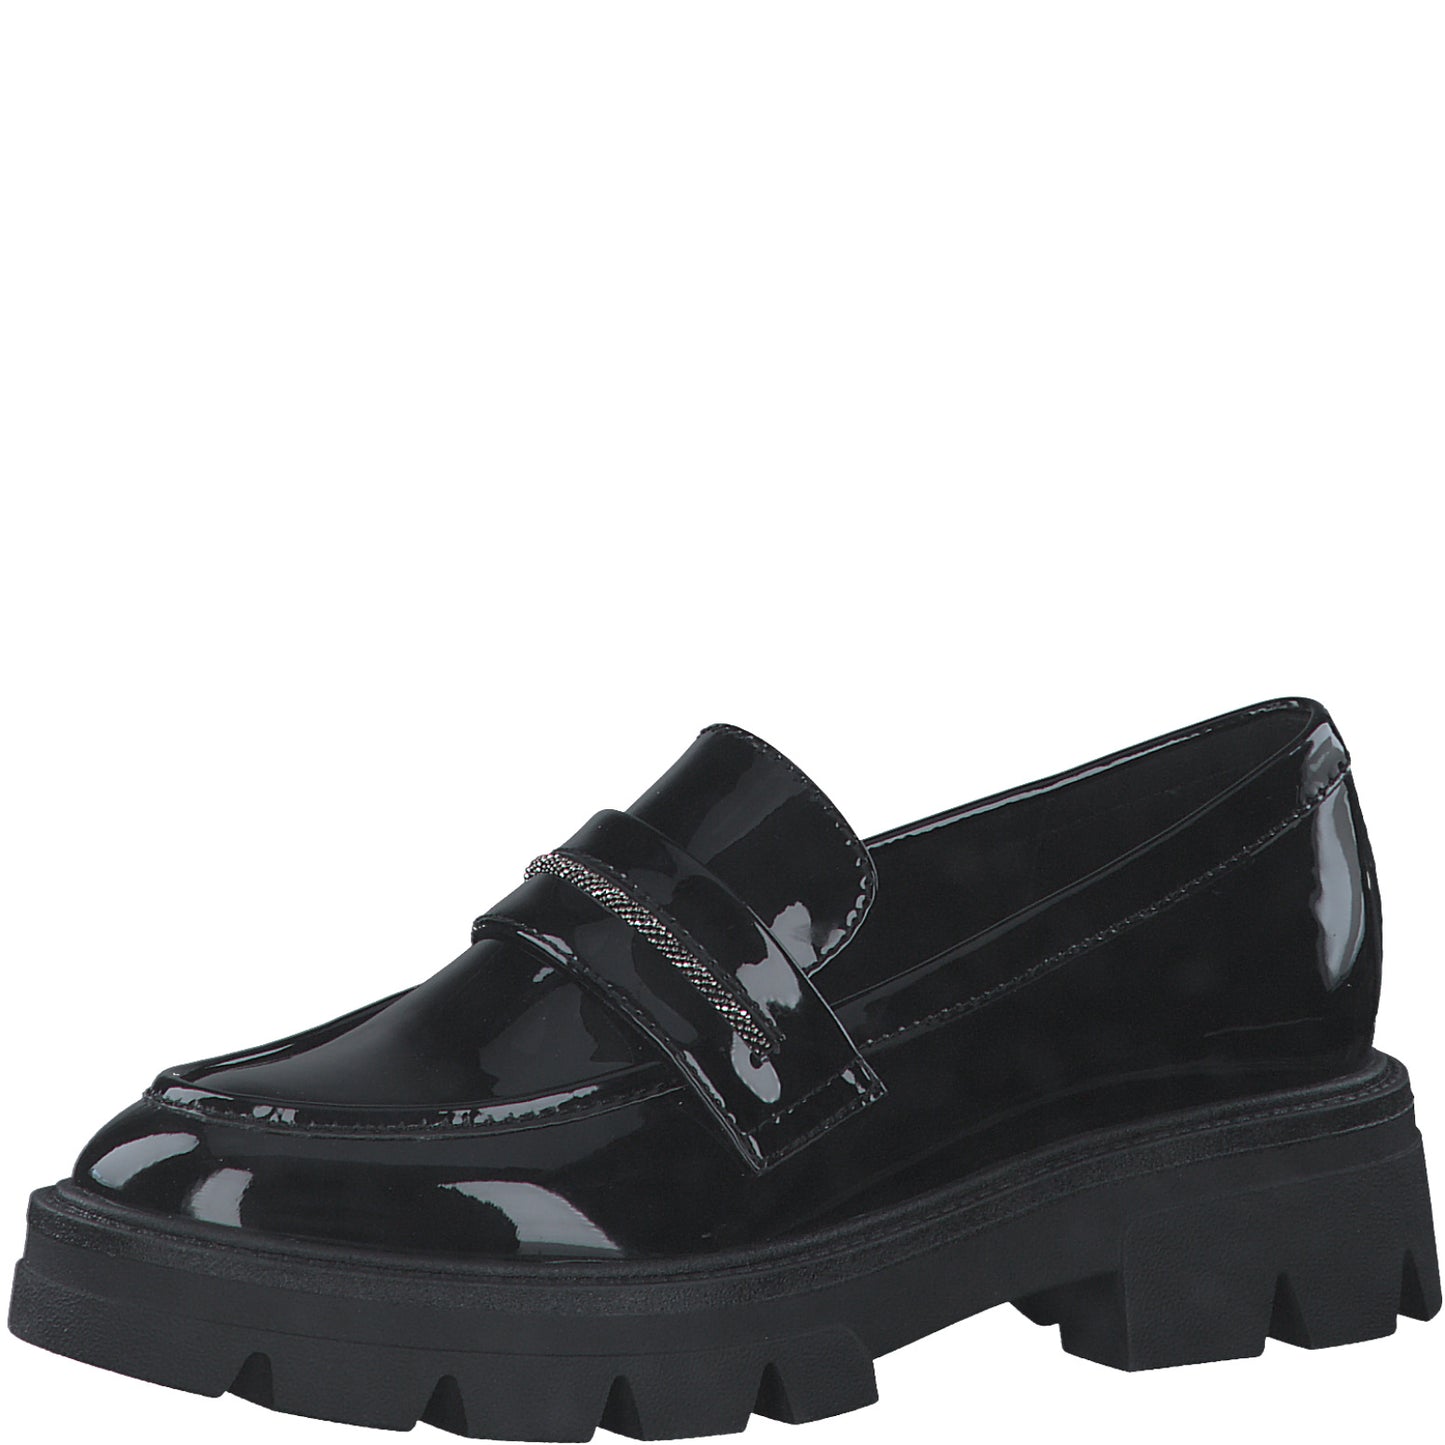 S.oliver Loafers  Black Patent